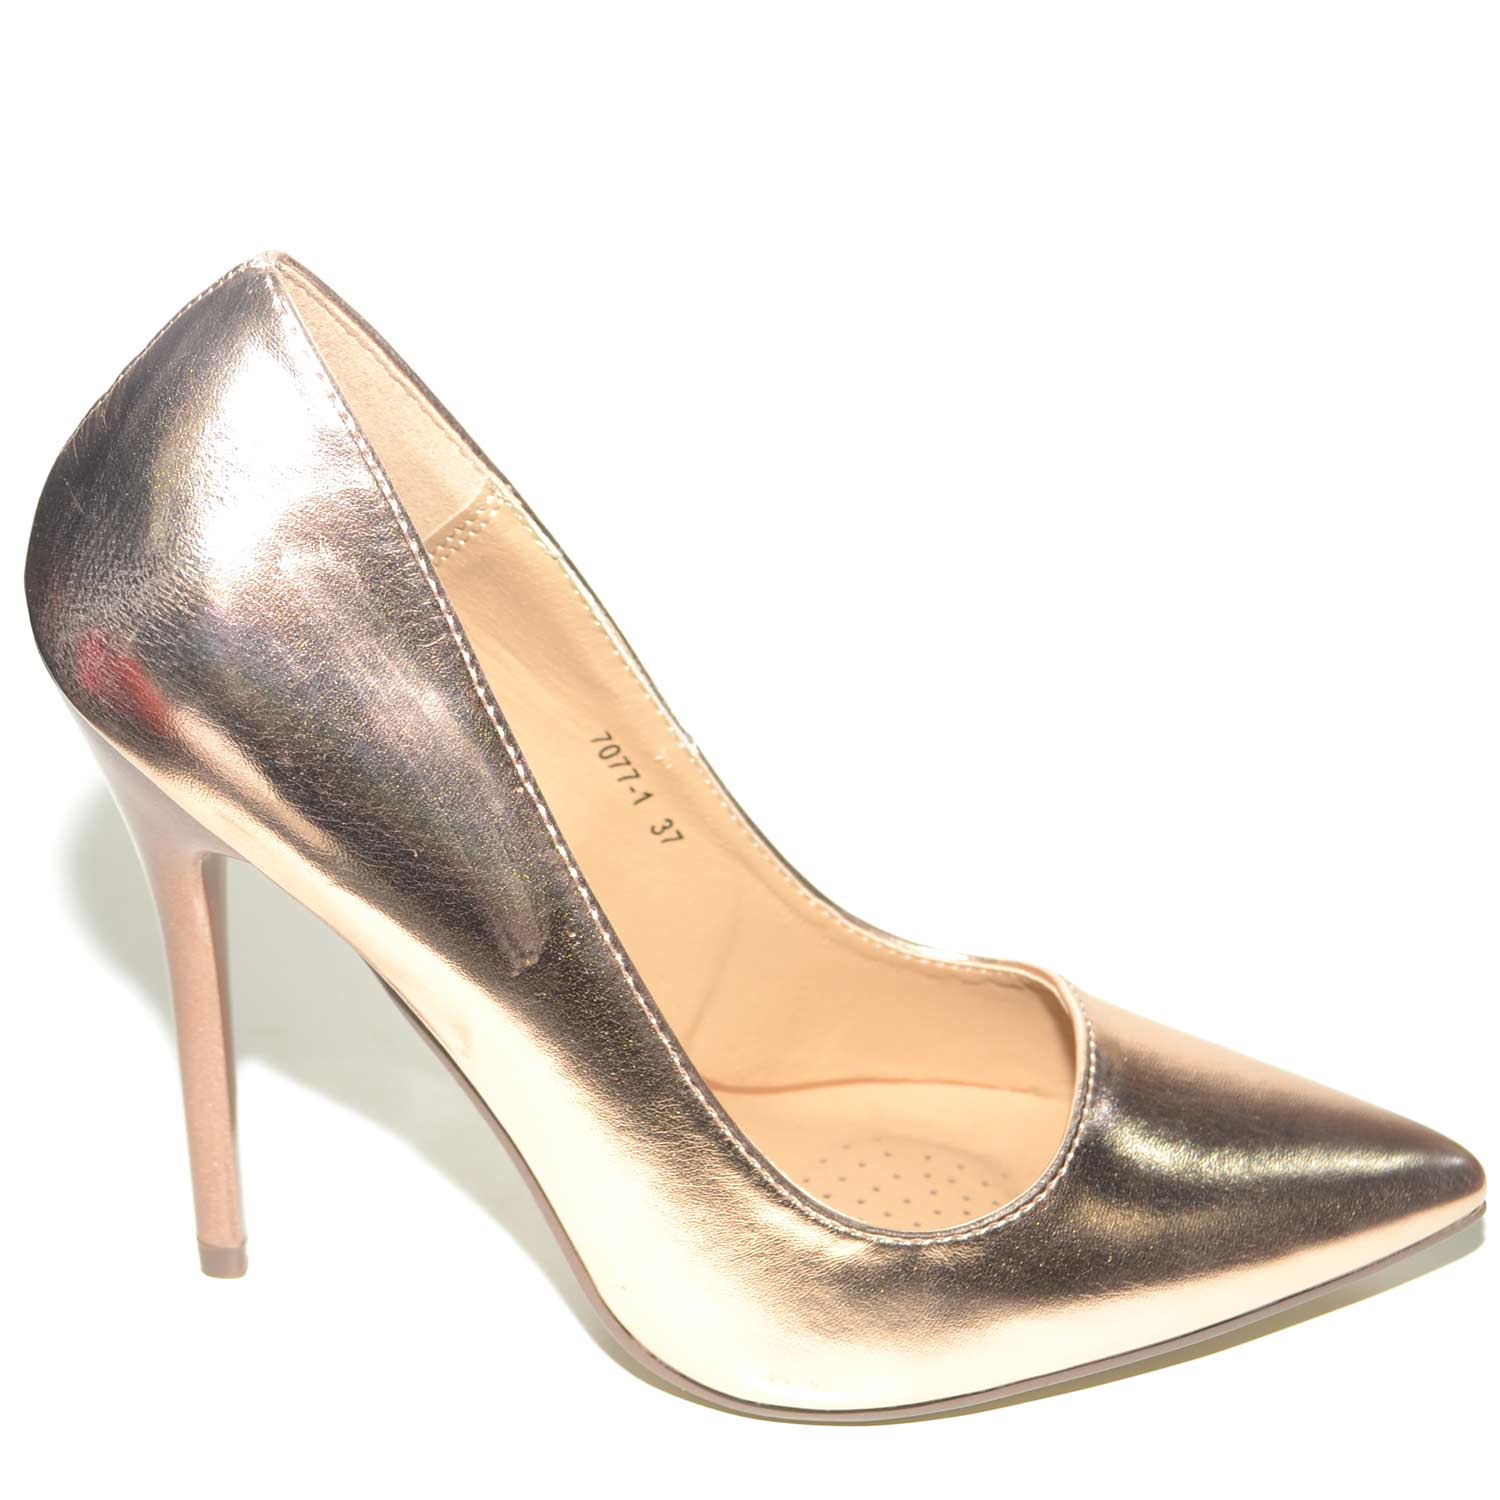 Decollete donna bronzo linea basic in ecopelle bronzo tacco a spillo 12 cm  elegante donna d�collet� Malu Shoes | MaluShoes